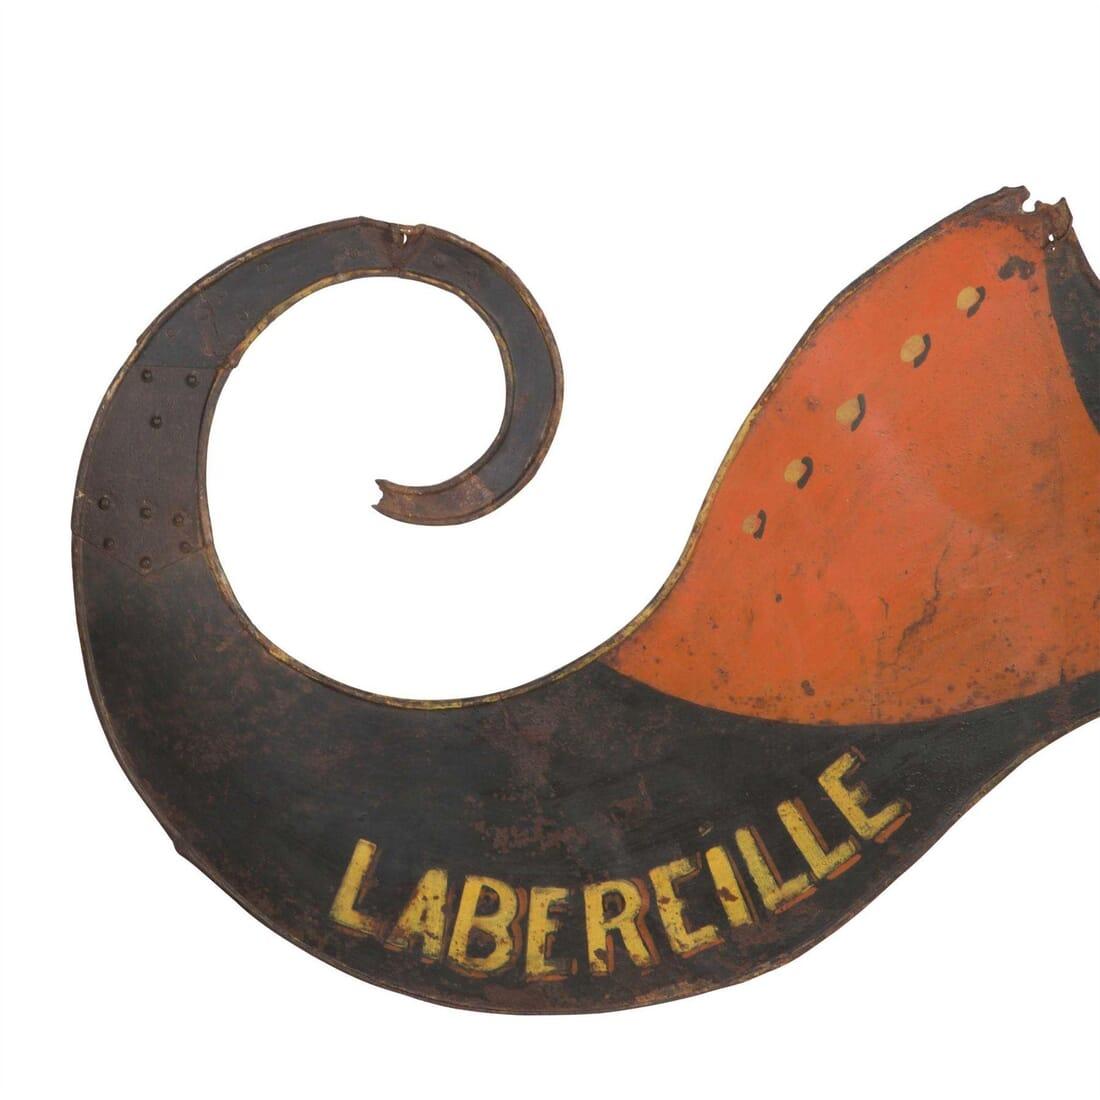 A fabulous French Shoe Maker's trade sign, circa 1900, painted iron, with hanging bracket (not original).